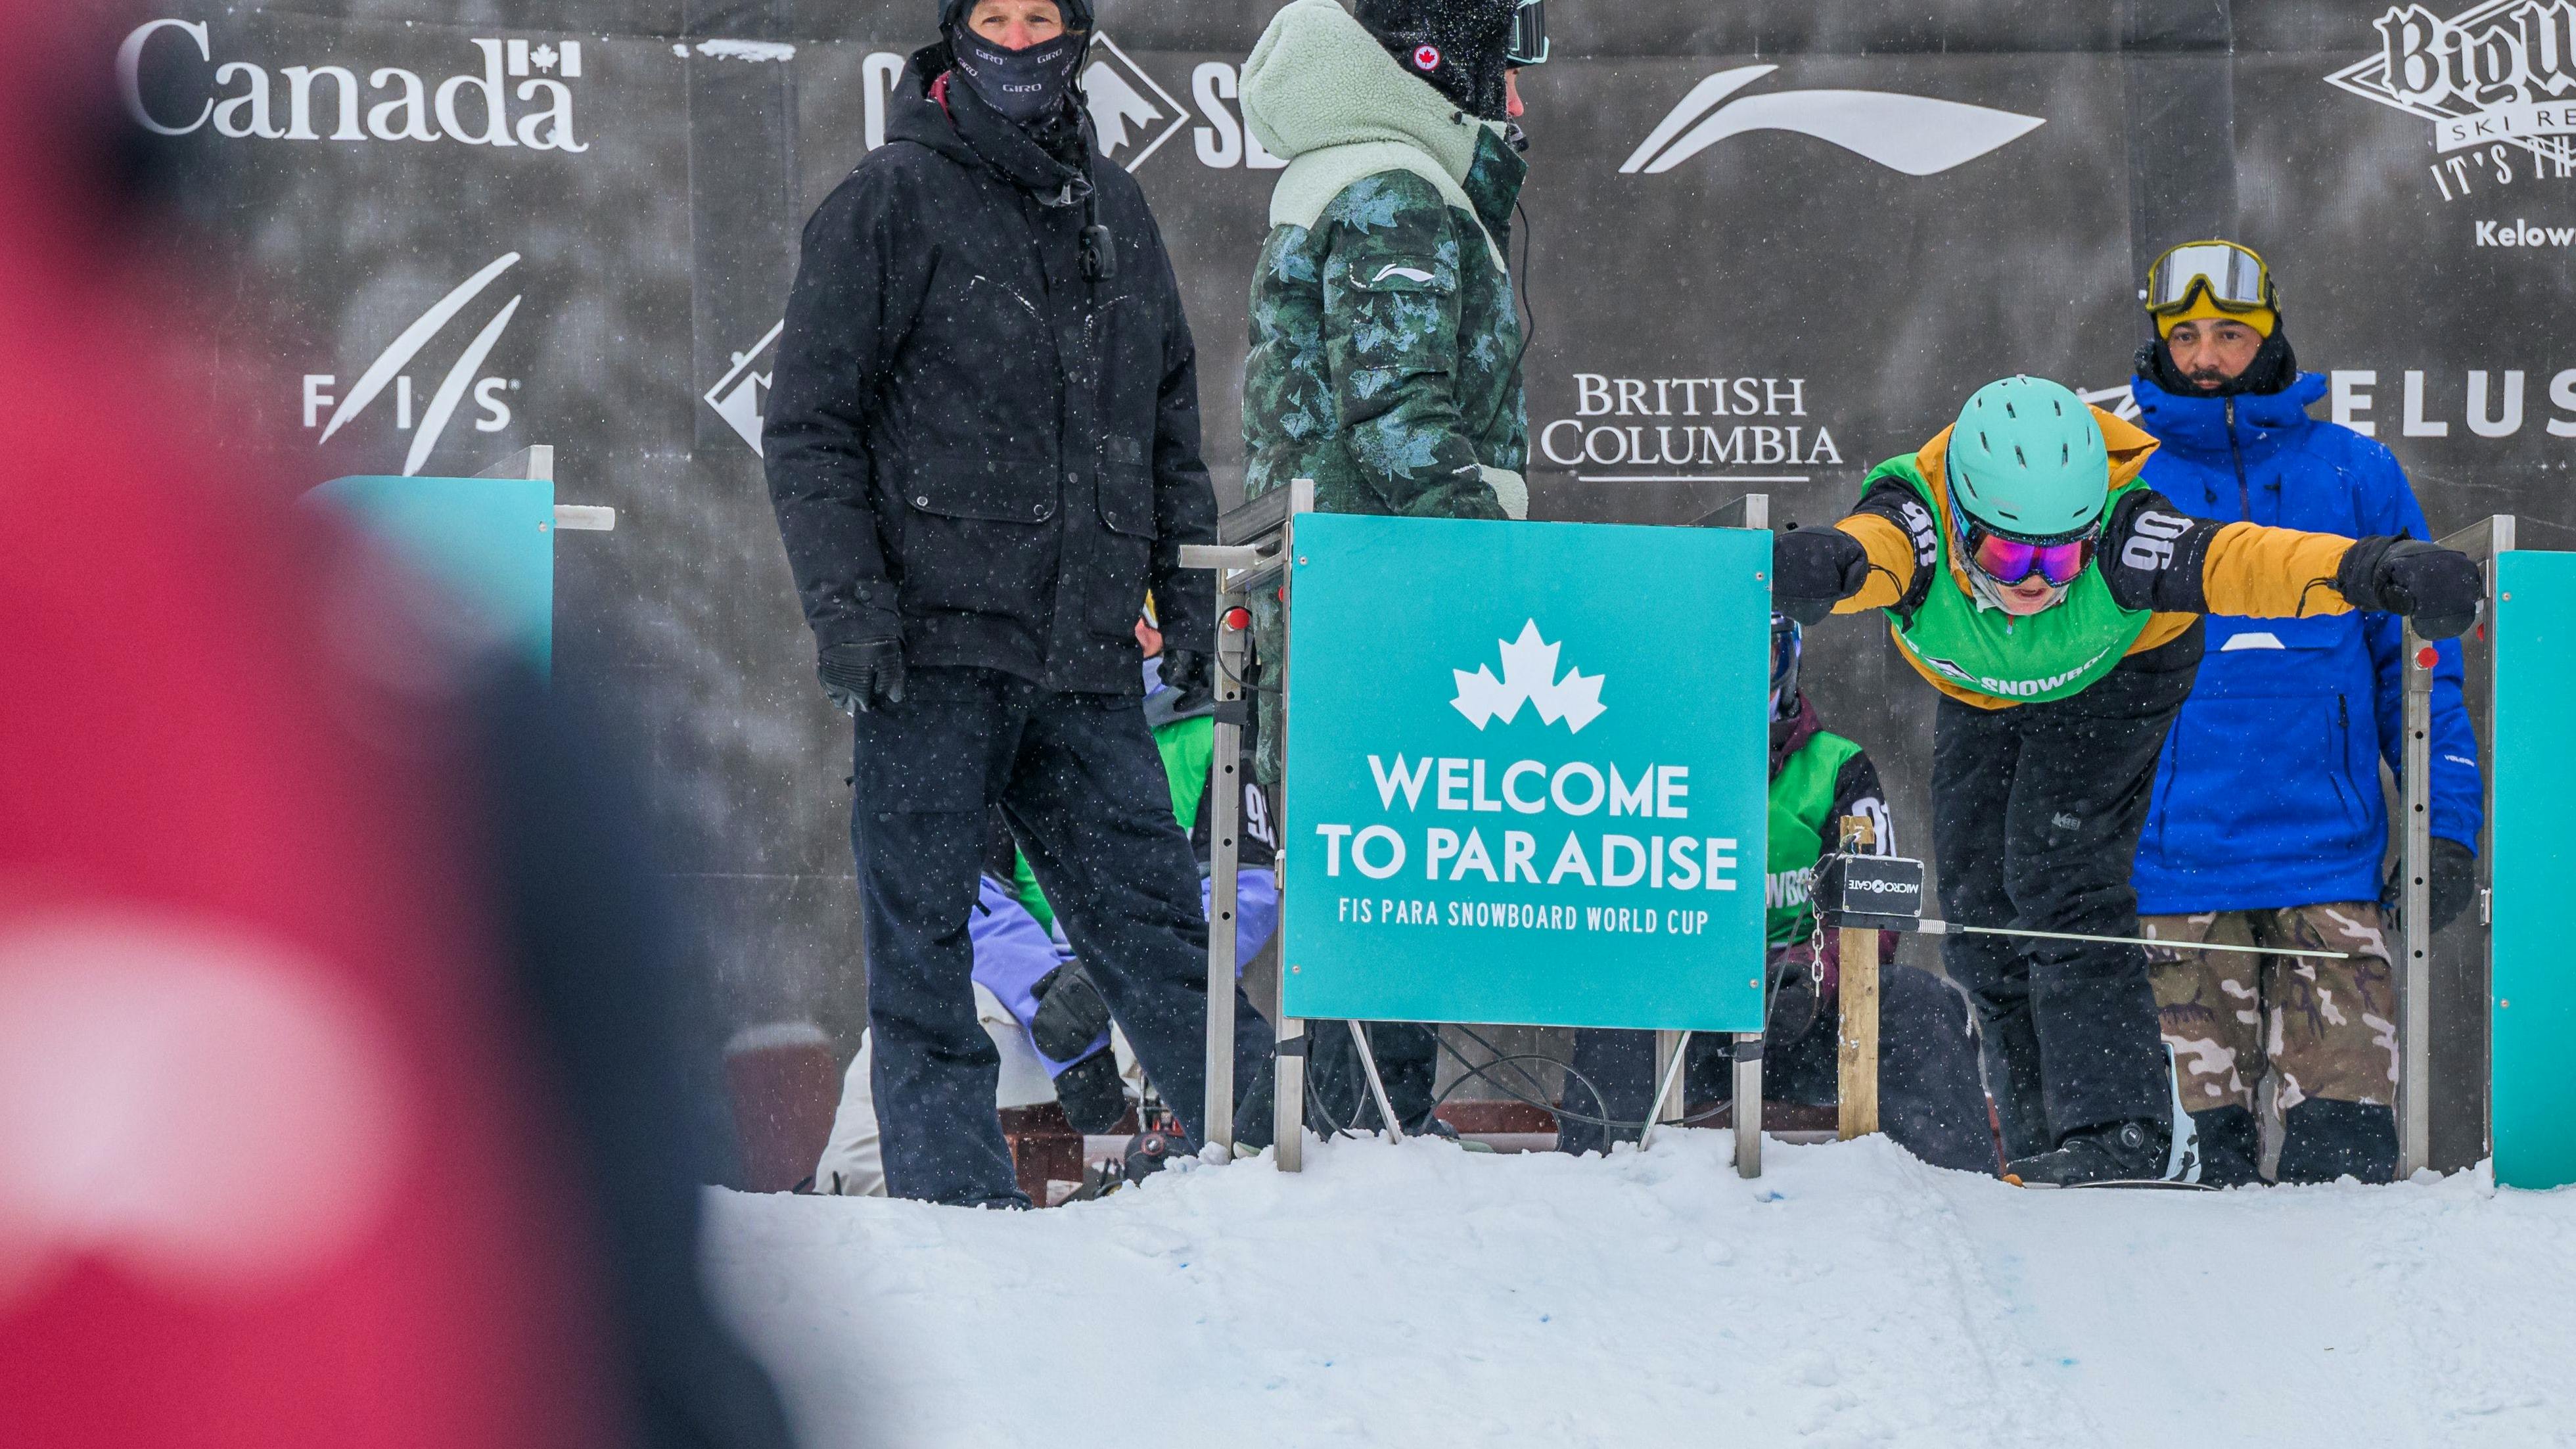 Snowboarder in yellow jacket, green race bib and blue helmet bent over in the starting gate at the start of a banked slalome race with other riders standing in the background.